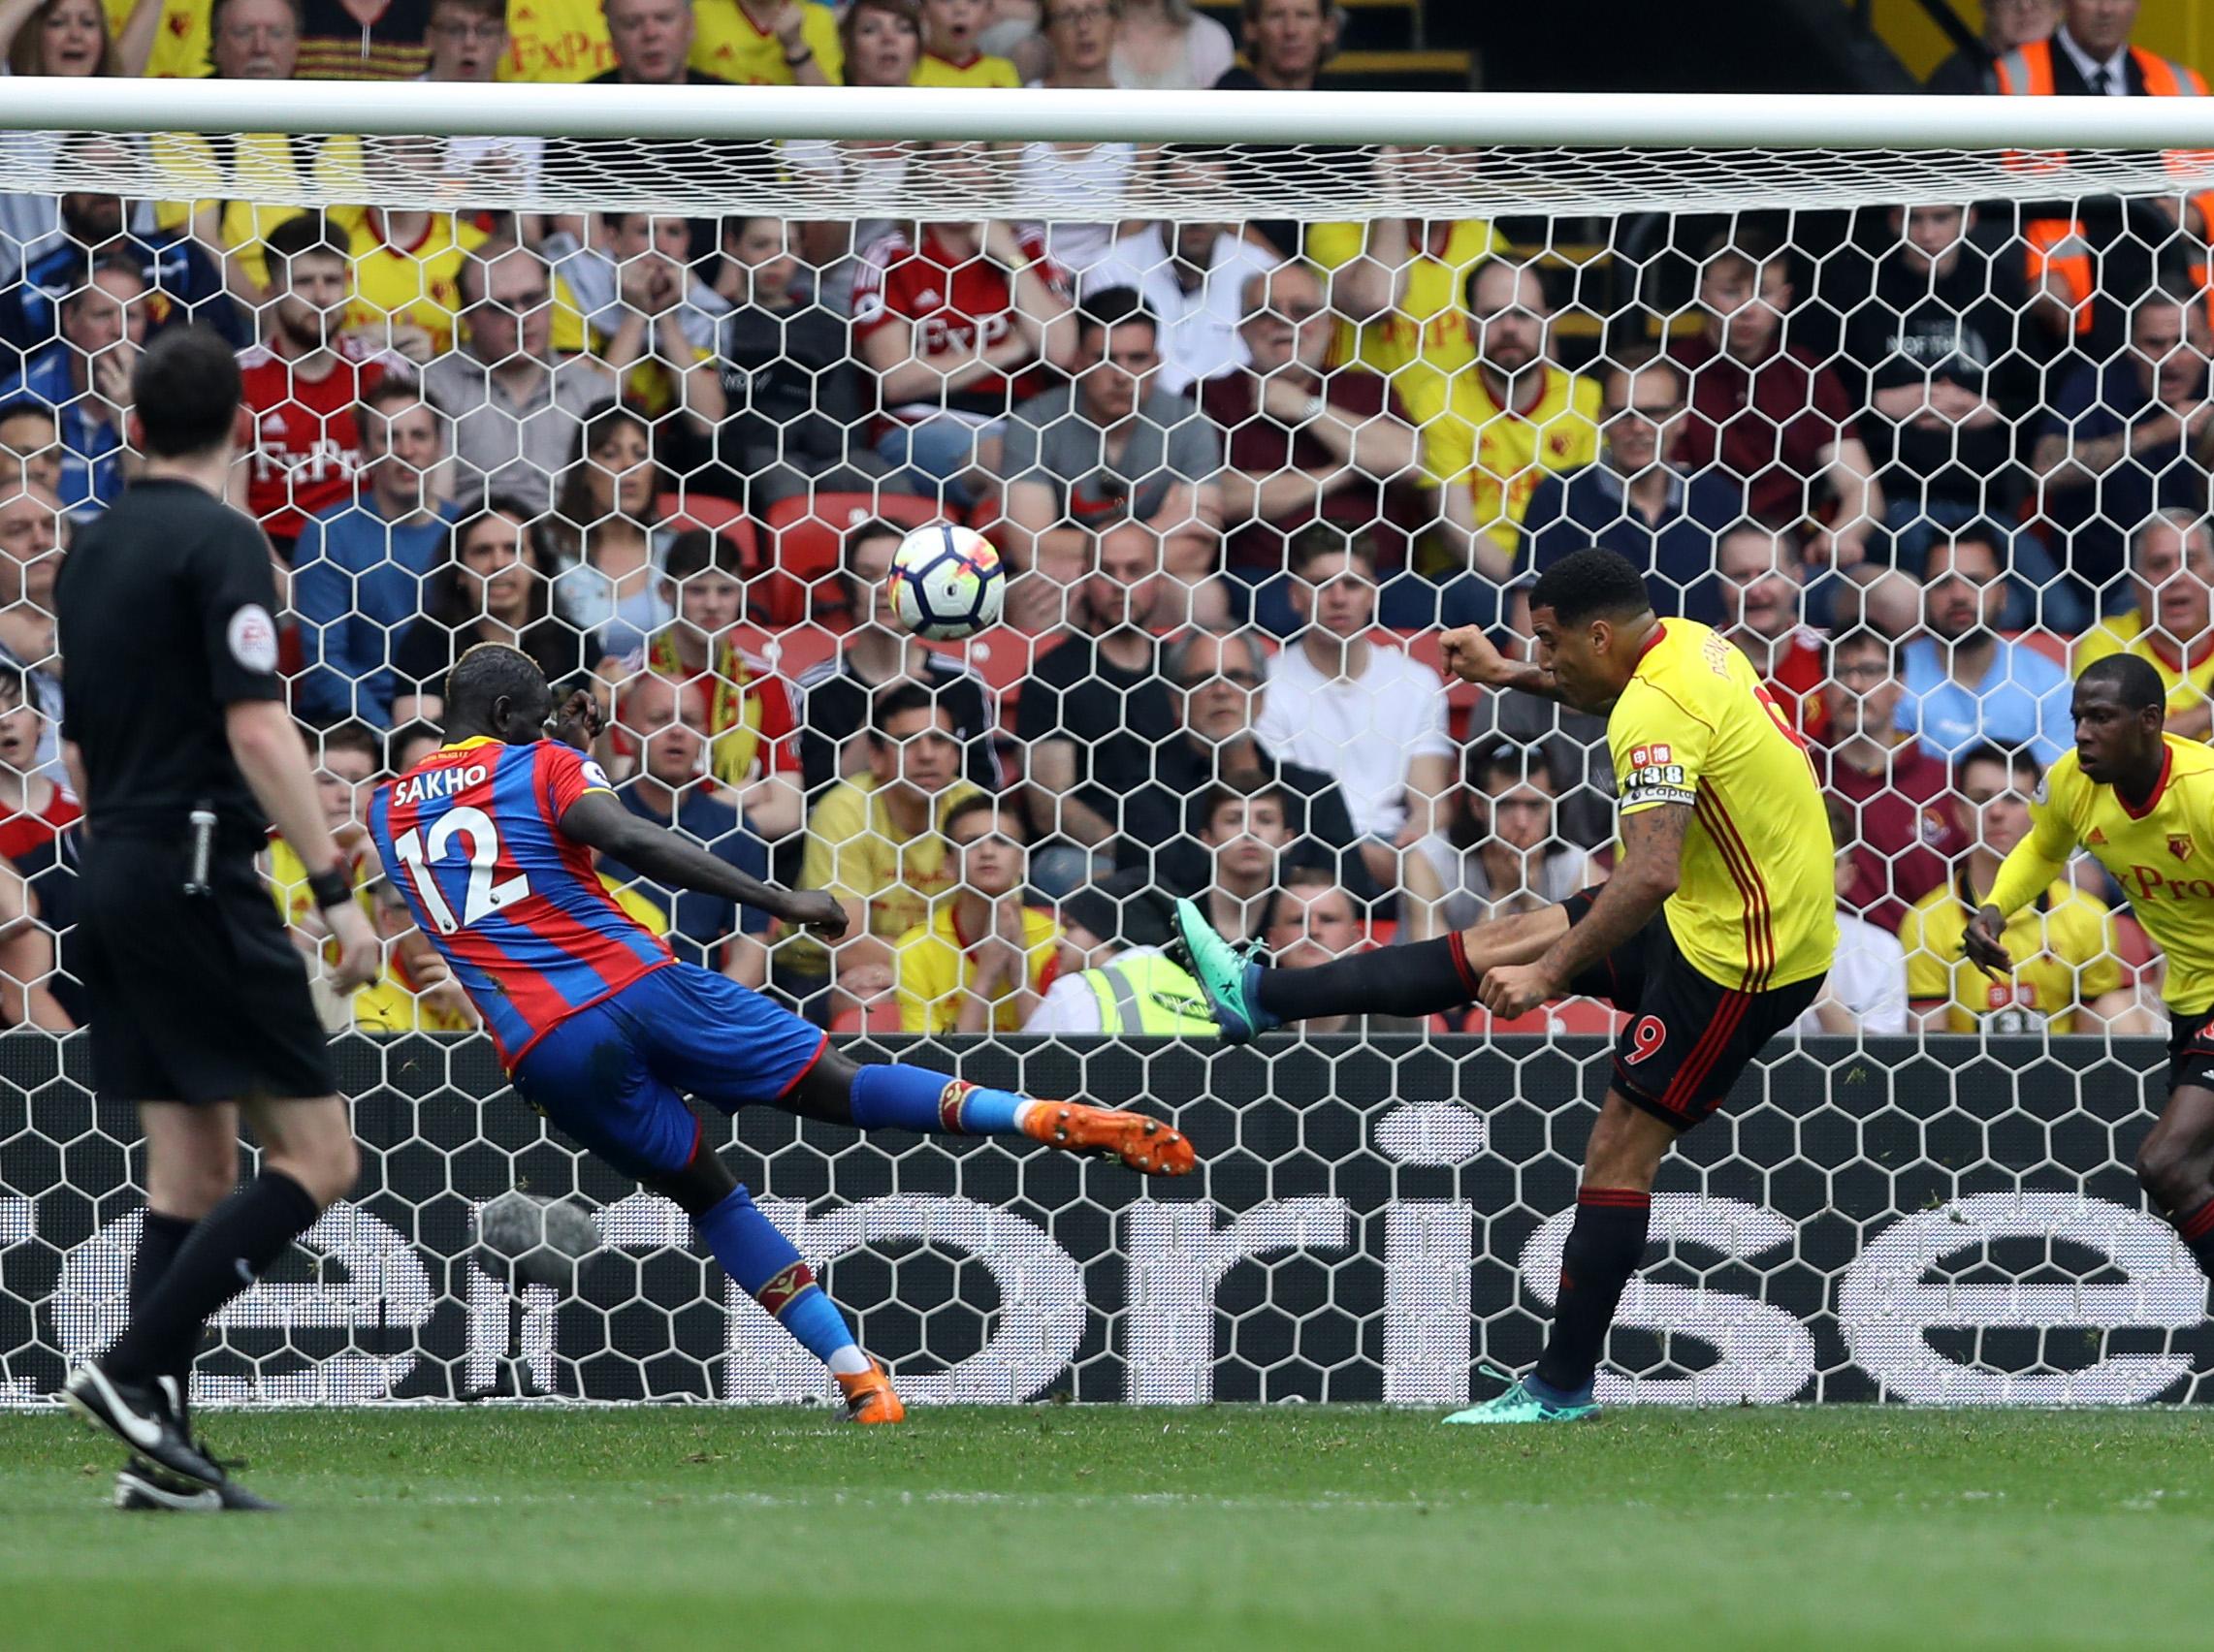 Crystal Palace inched closer to safety